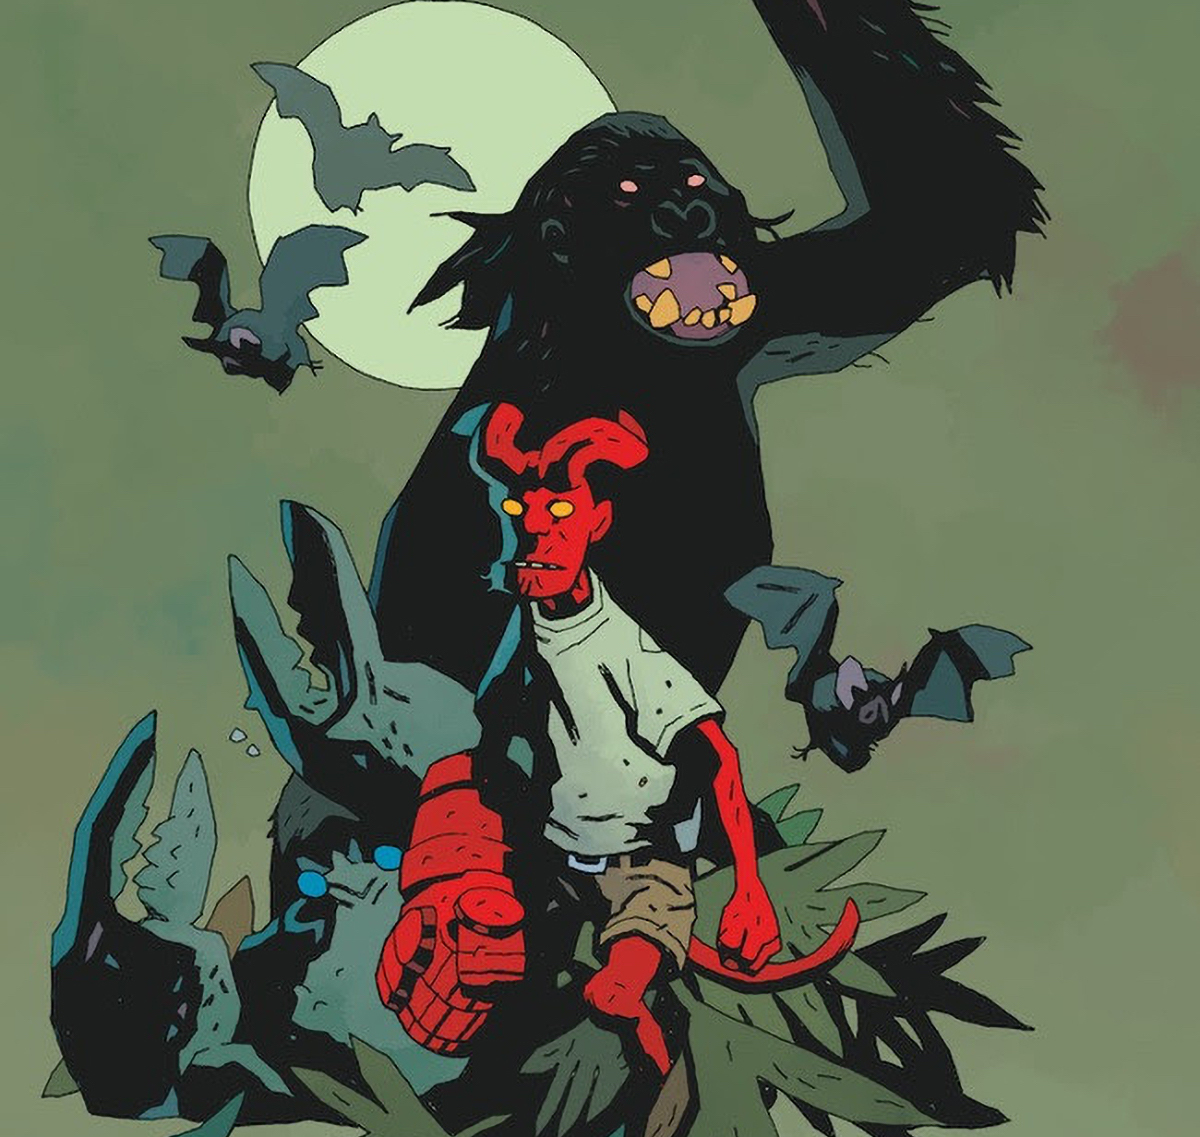 Dark Horse announces 'Young Hellboy: The Hidden Land' for February 2021